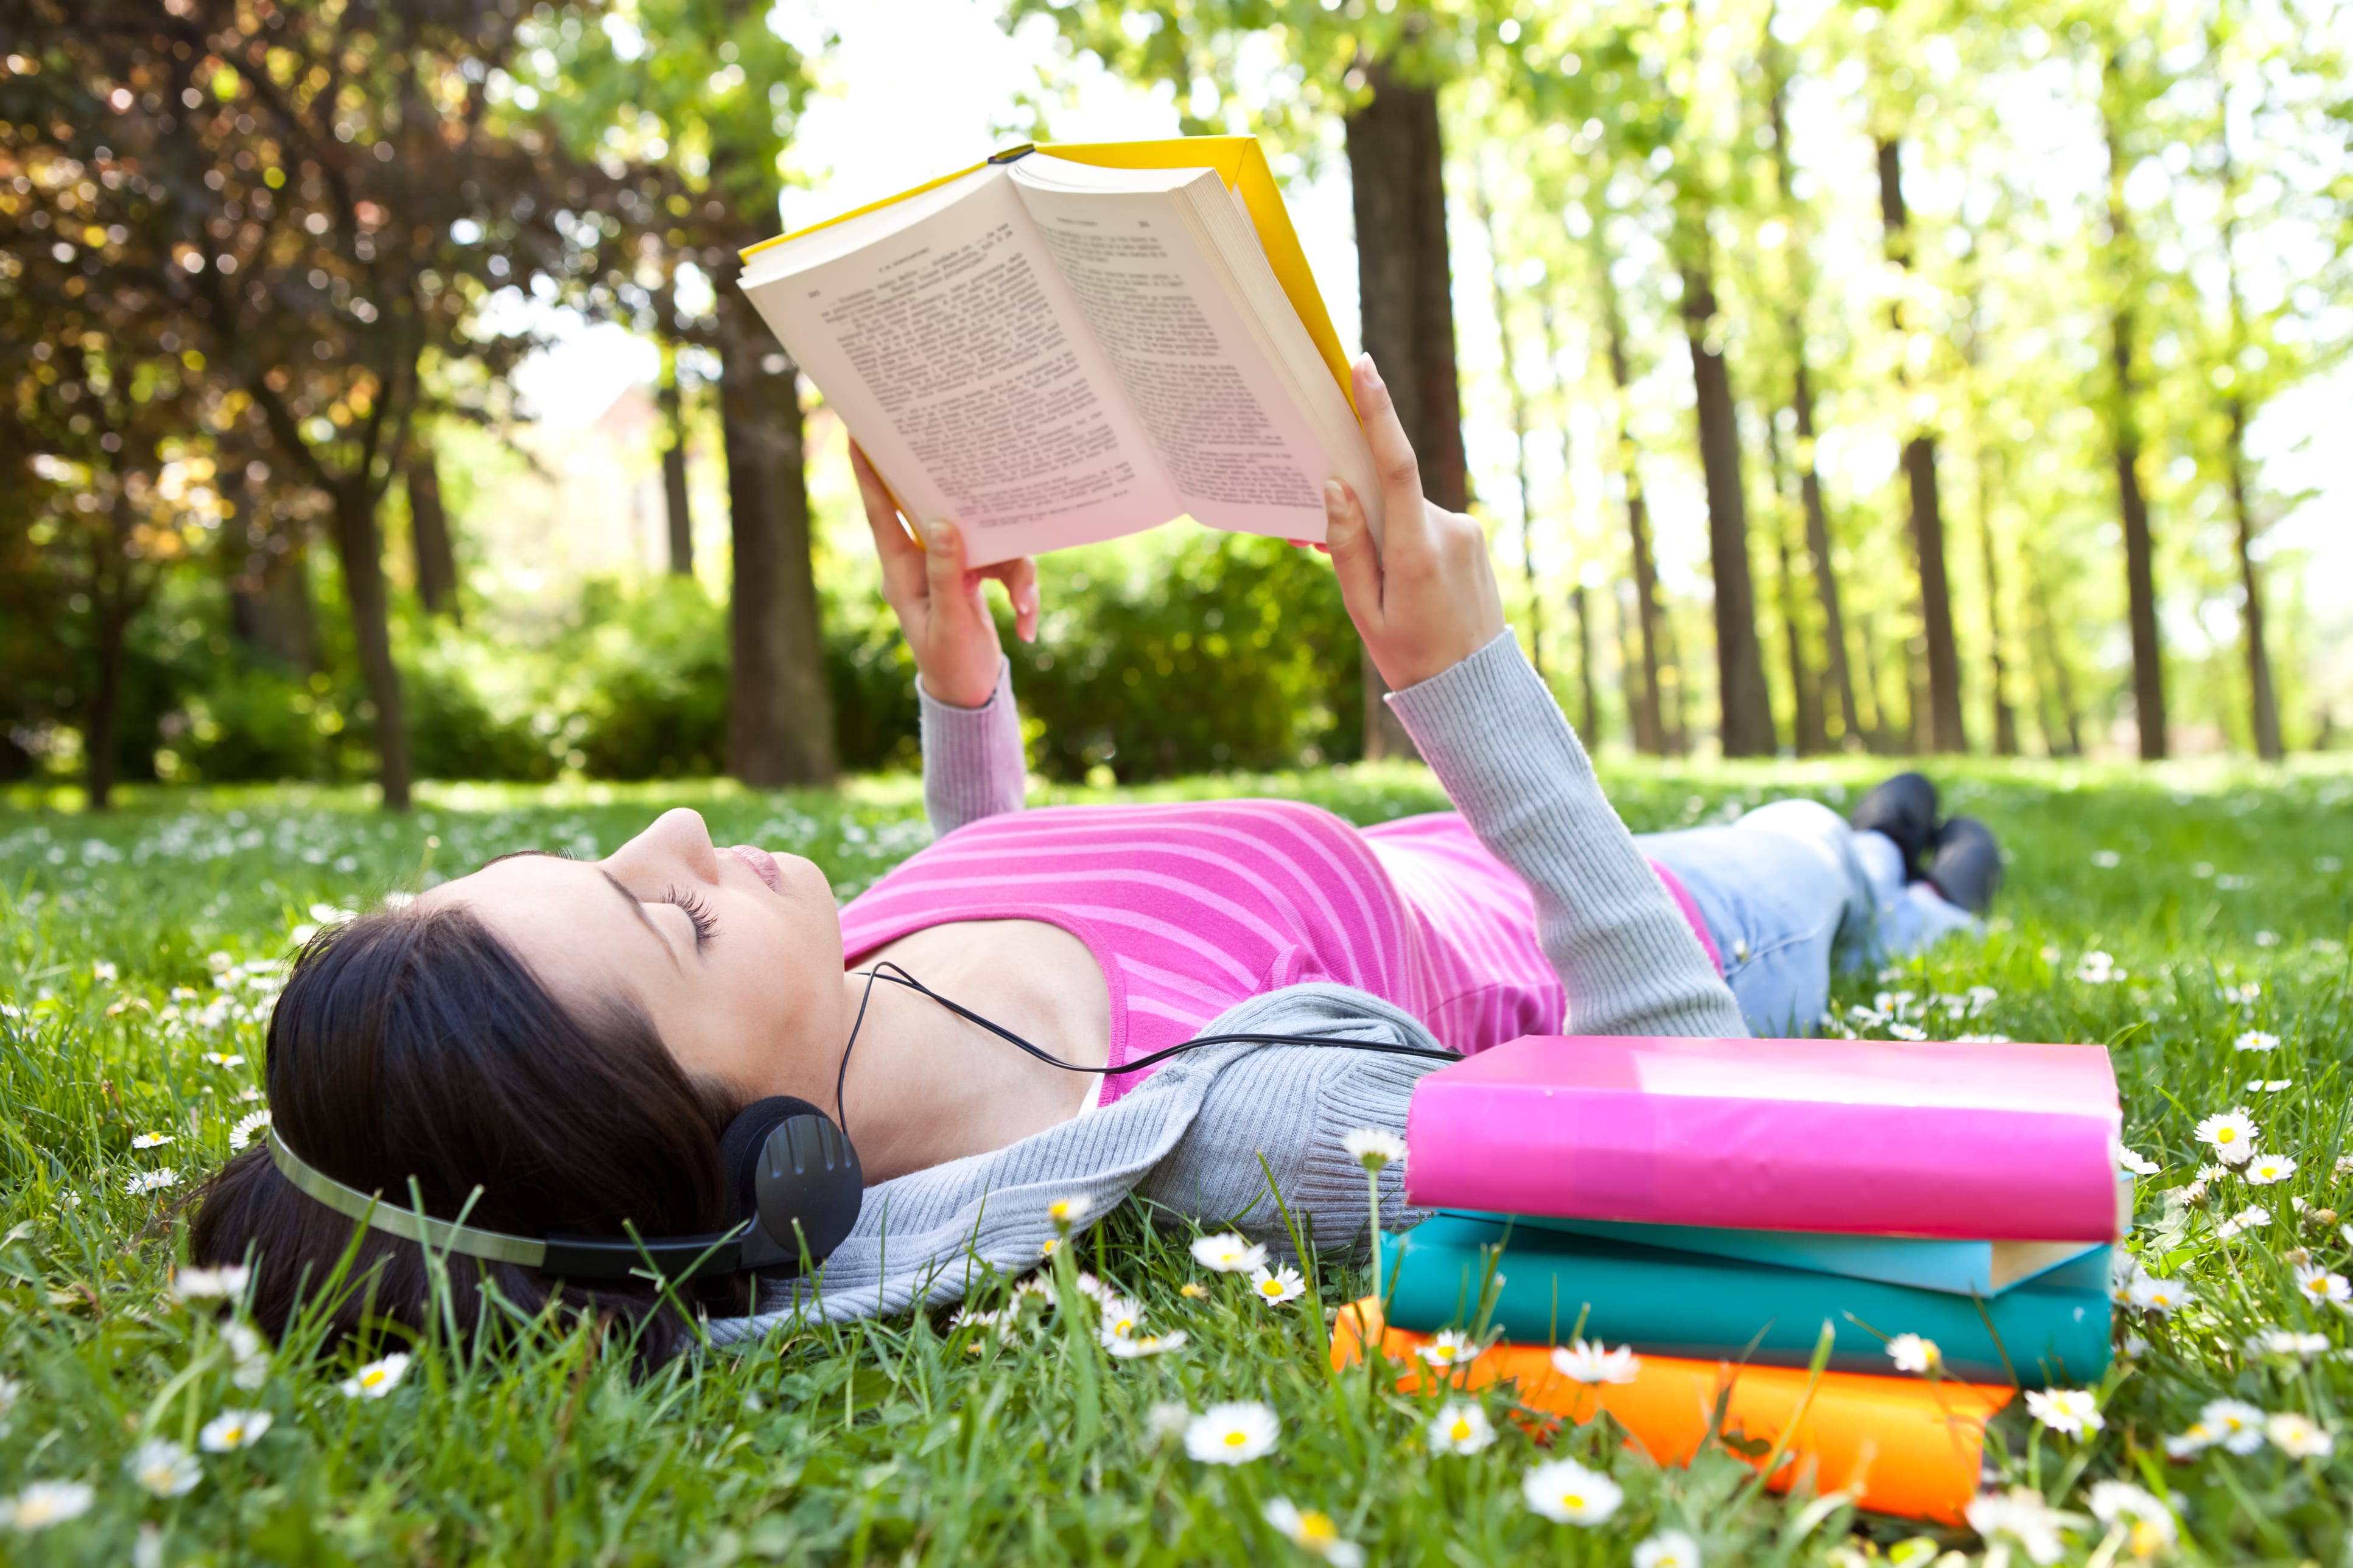 girl lying on grass and relaxing with book and music